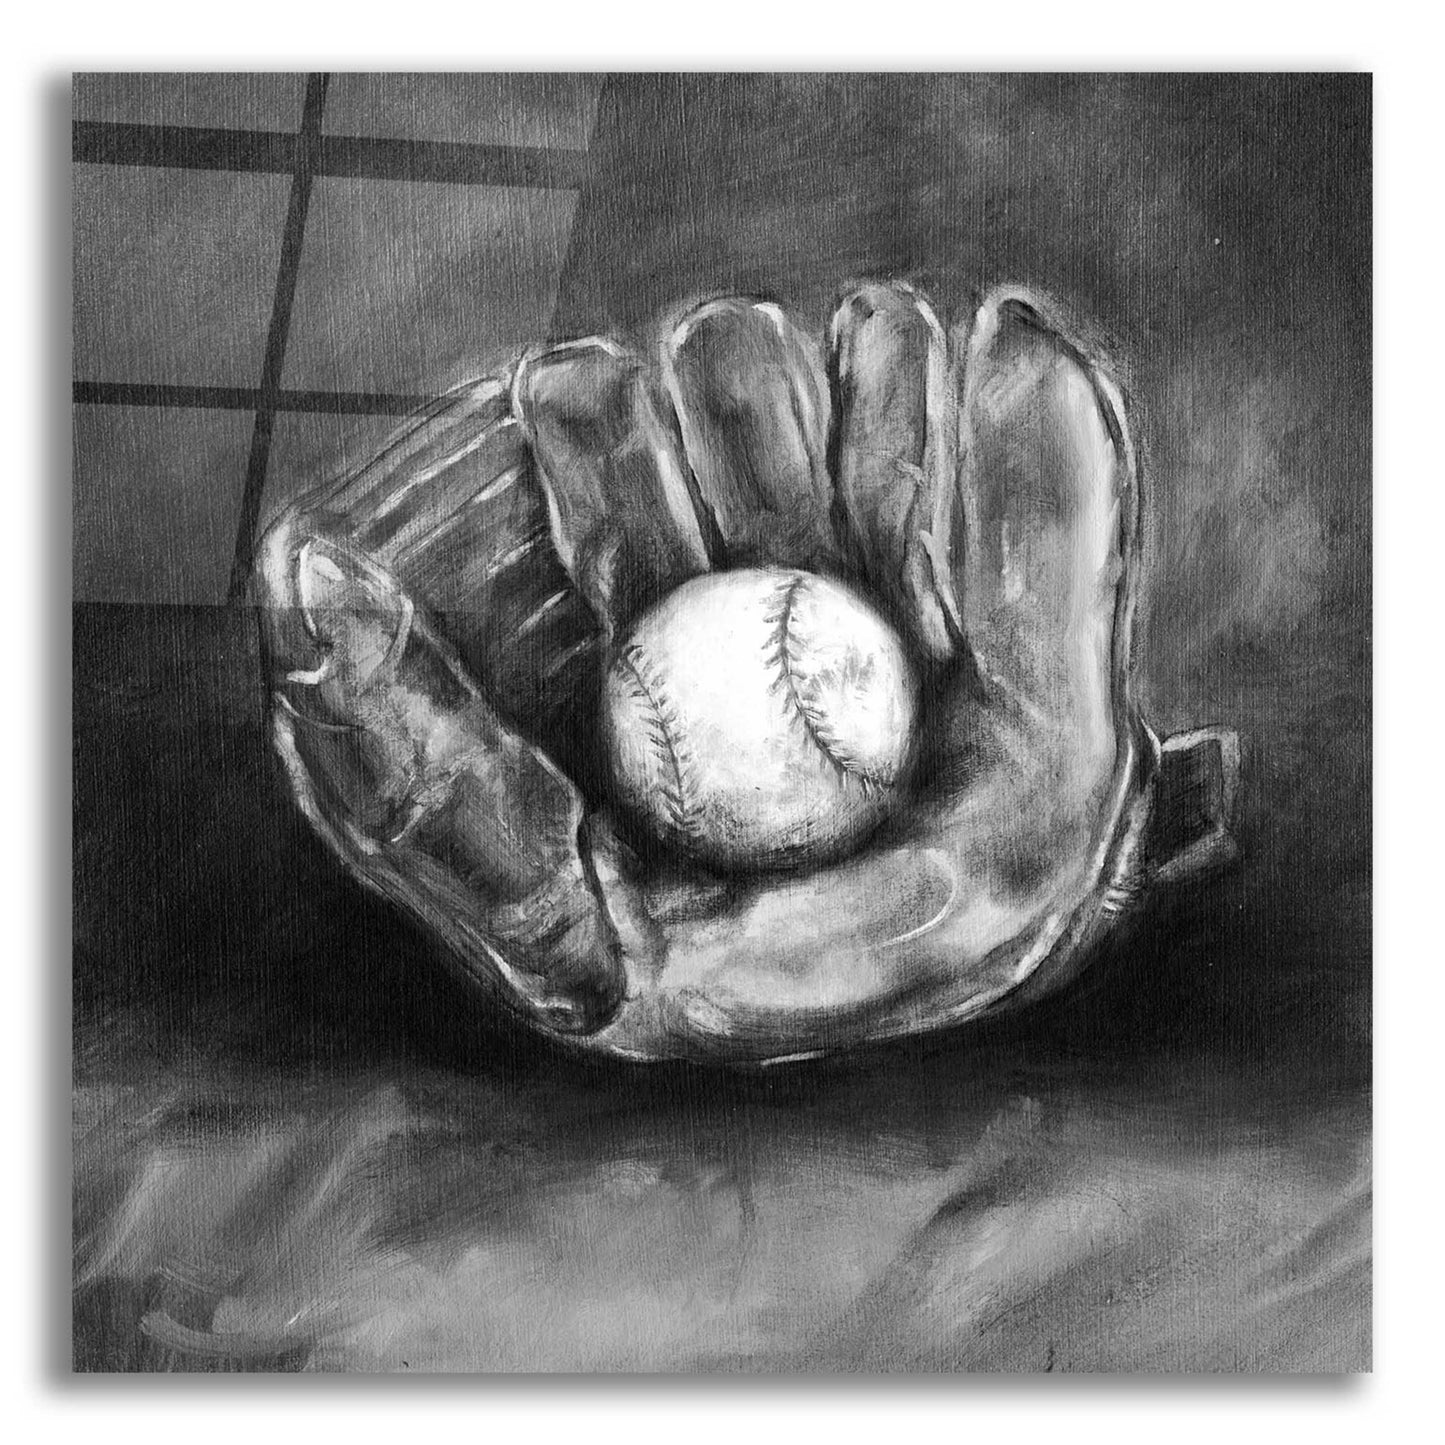 Epic Art 'Rustic Sports III Black and White' by Ethan Harper, Acrylic Glass Wall Art,12x12